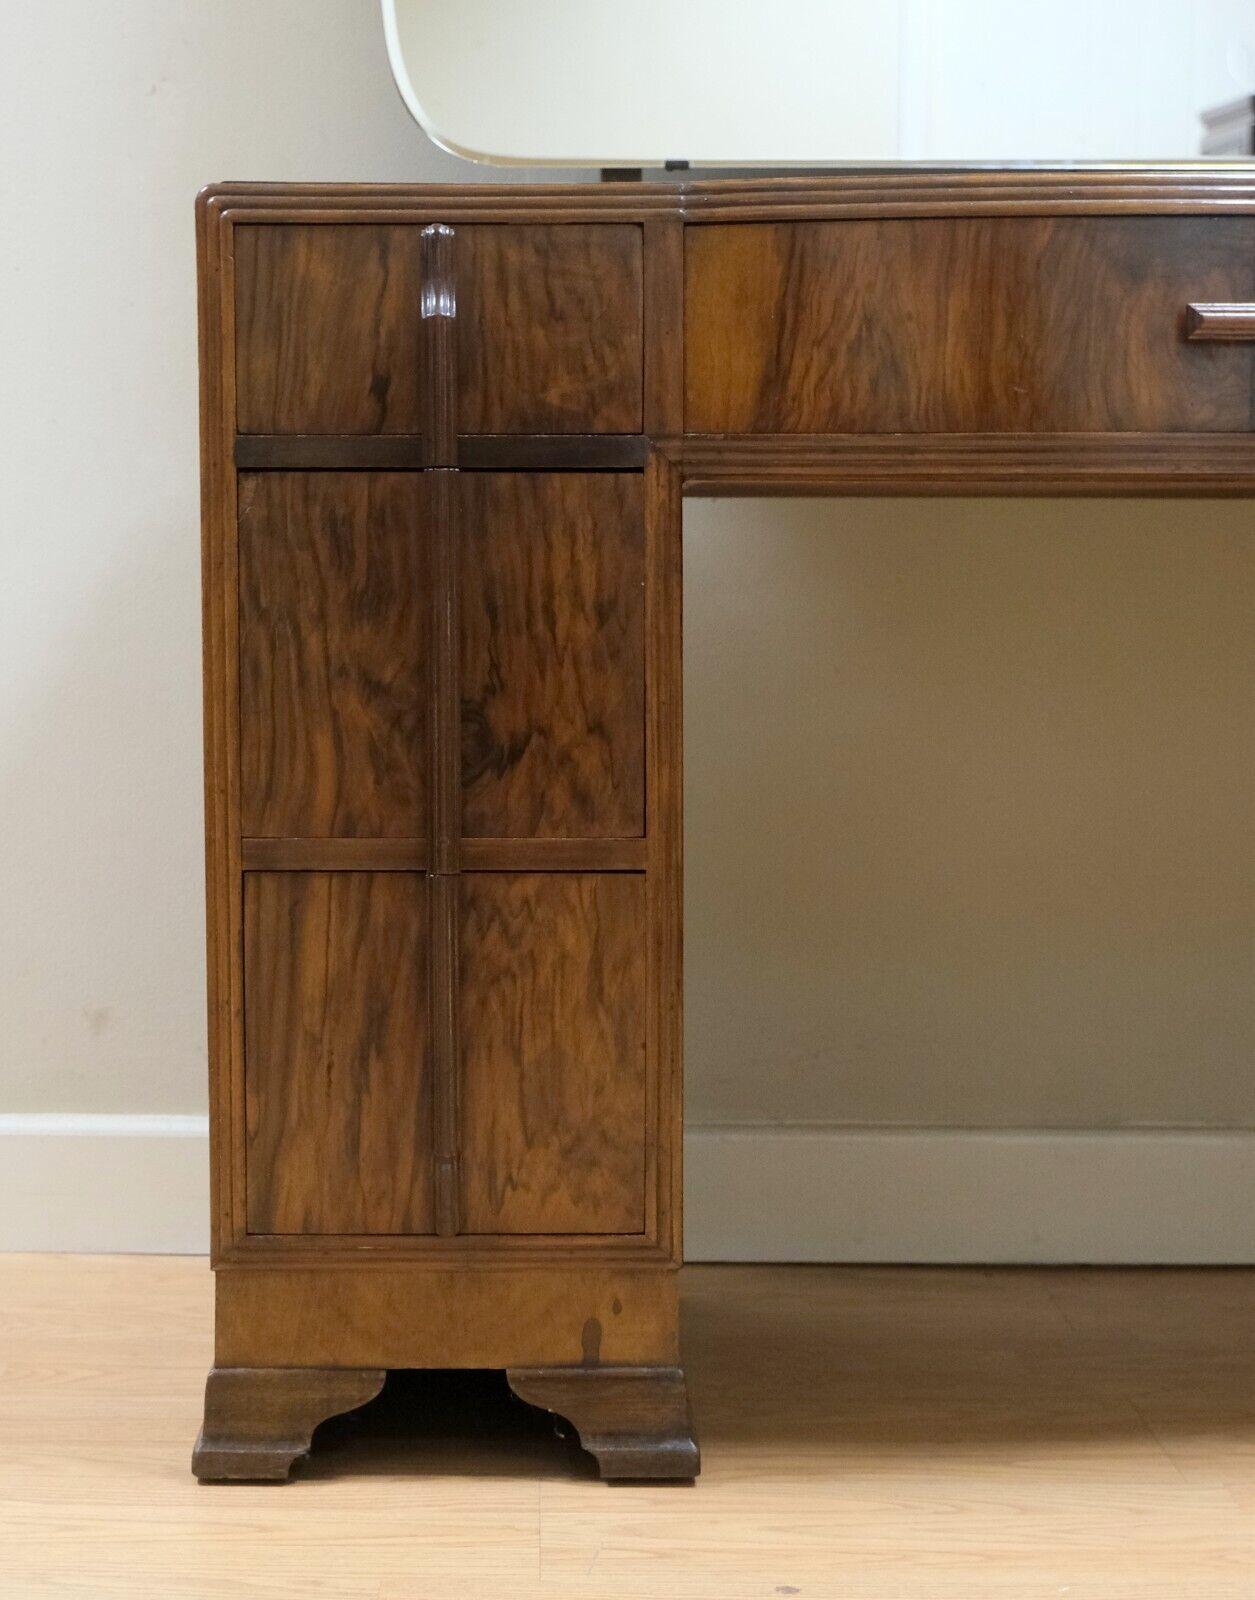 Hand-Crafted STUNNING 1920's ART DECO BURR WALNUT DRESSING TABLE WITH SEVEN DRAWERS